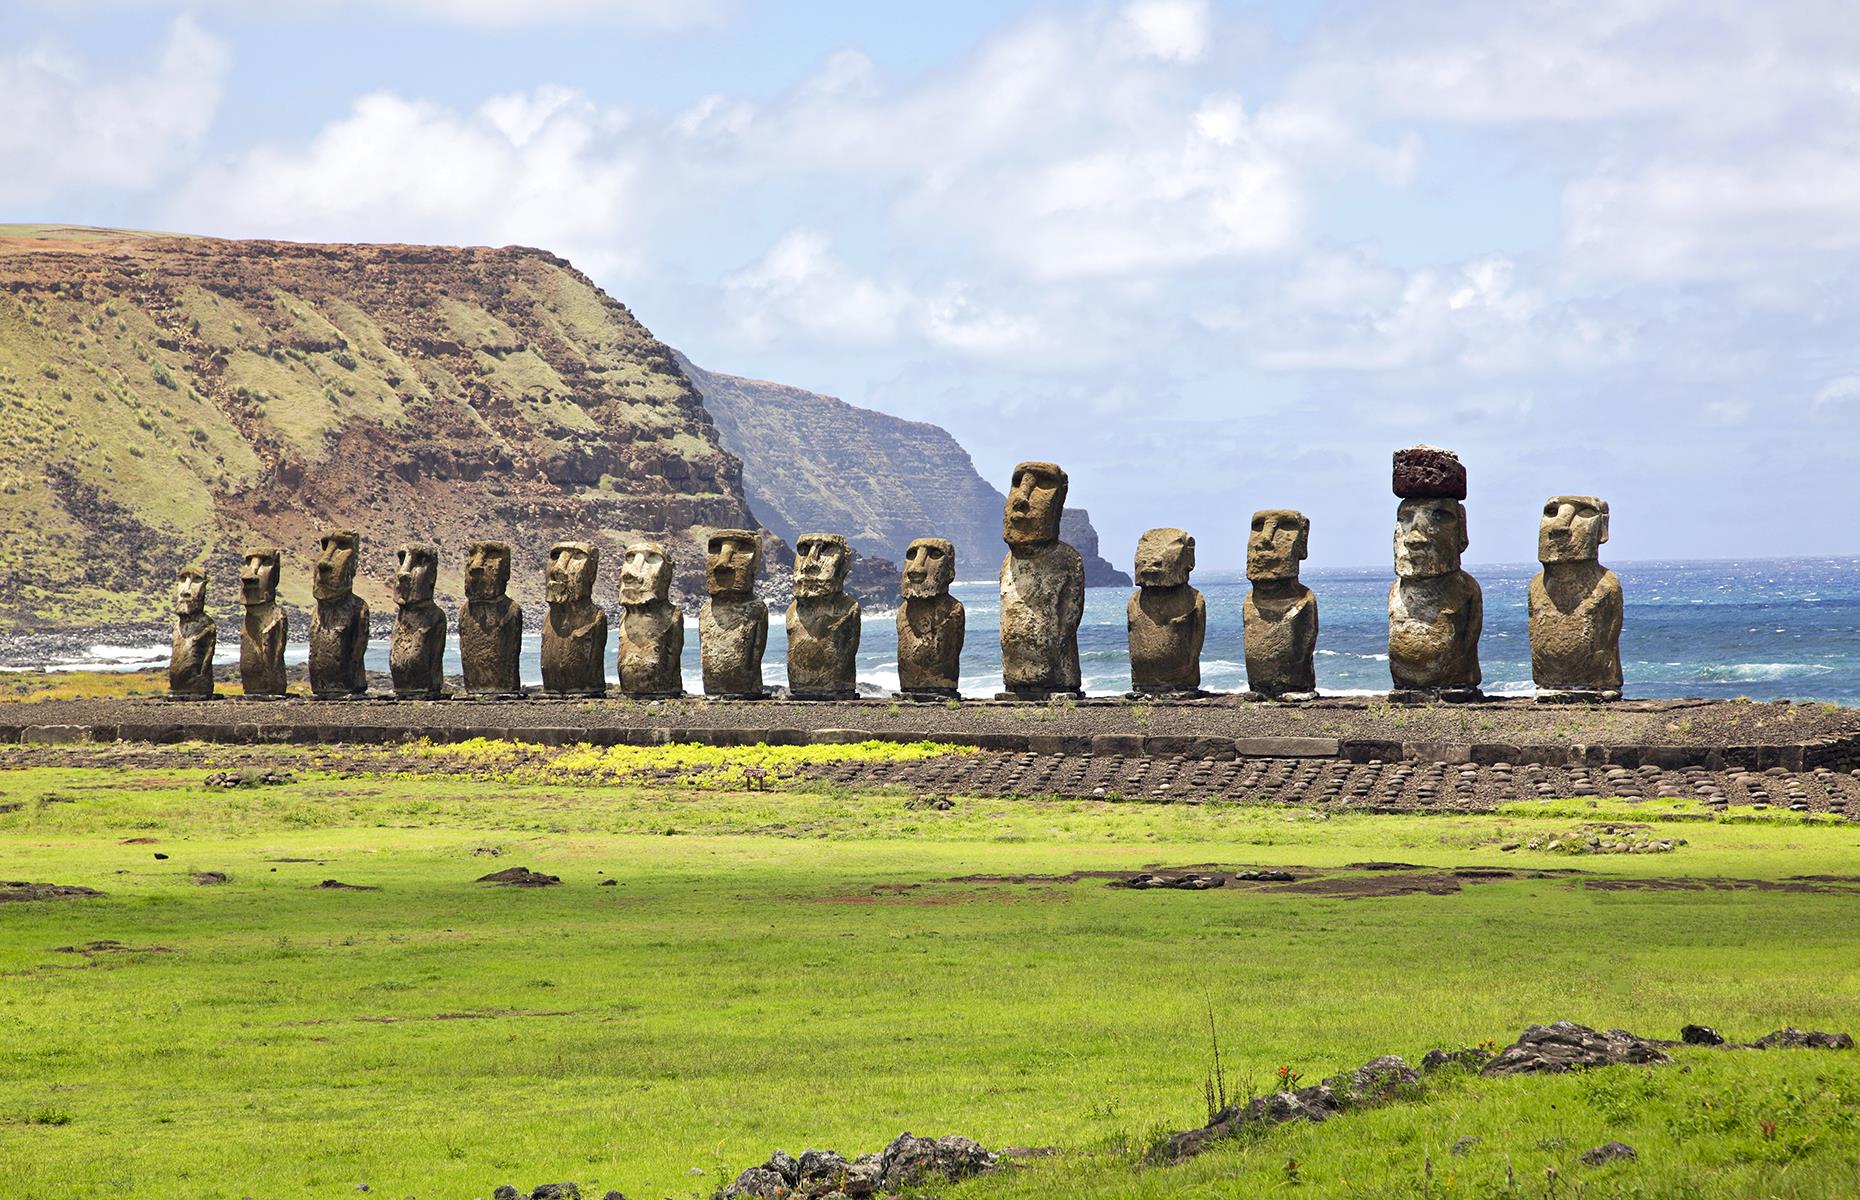 <p>This UNESCO-protected Chilean island is best known for its moai, hundreds of stone statues scattered around the landscape. Dating from between AD 1100 and 1680, some are almost whole figures, some are just giant heads, but how they were moved around the island remains a mystery.</p>  <p><a href="https://www.loveexploring.com/galleries/81415/amazing-places-to-explore-the-worlds-ancient-civilisations?page=1"><strong>Top spots around the world for history lovers</strong></a></p>